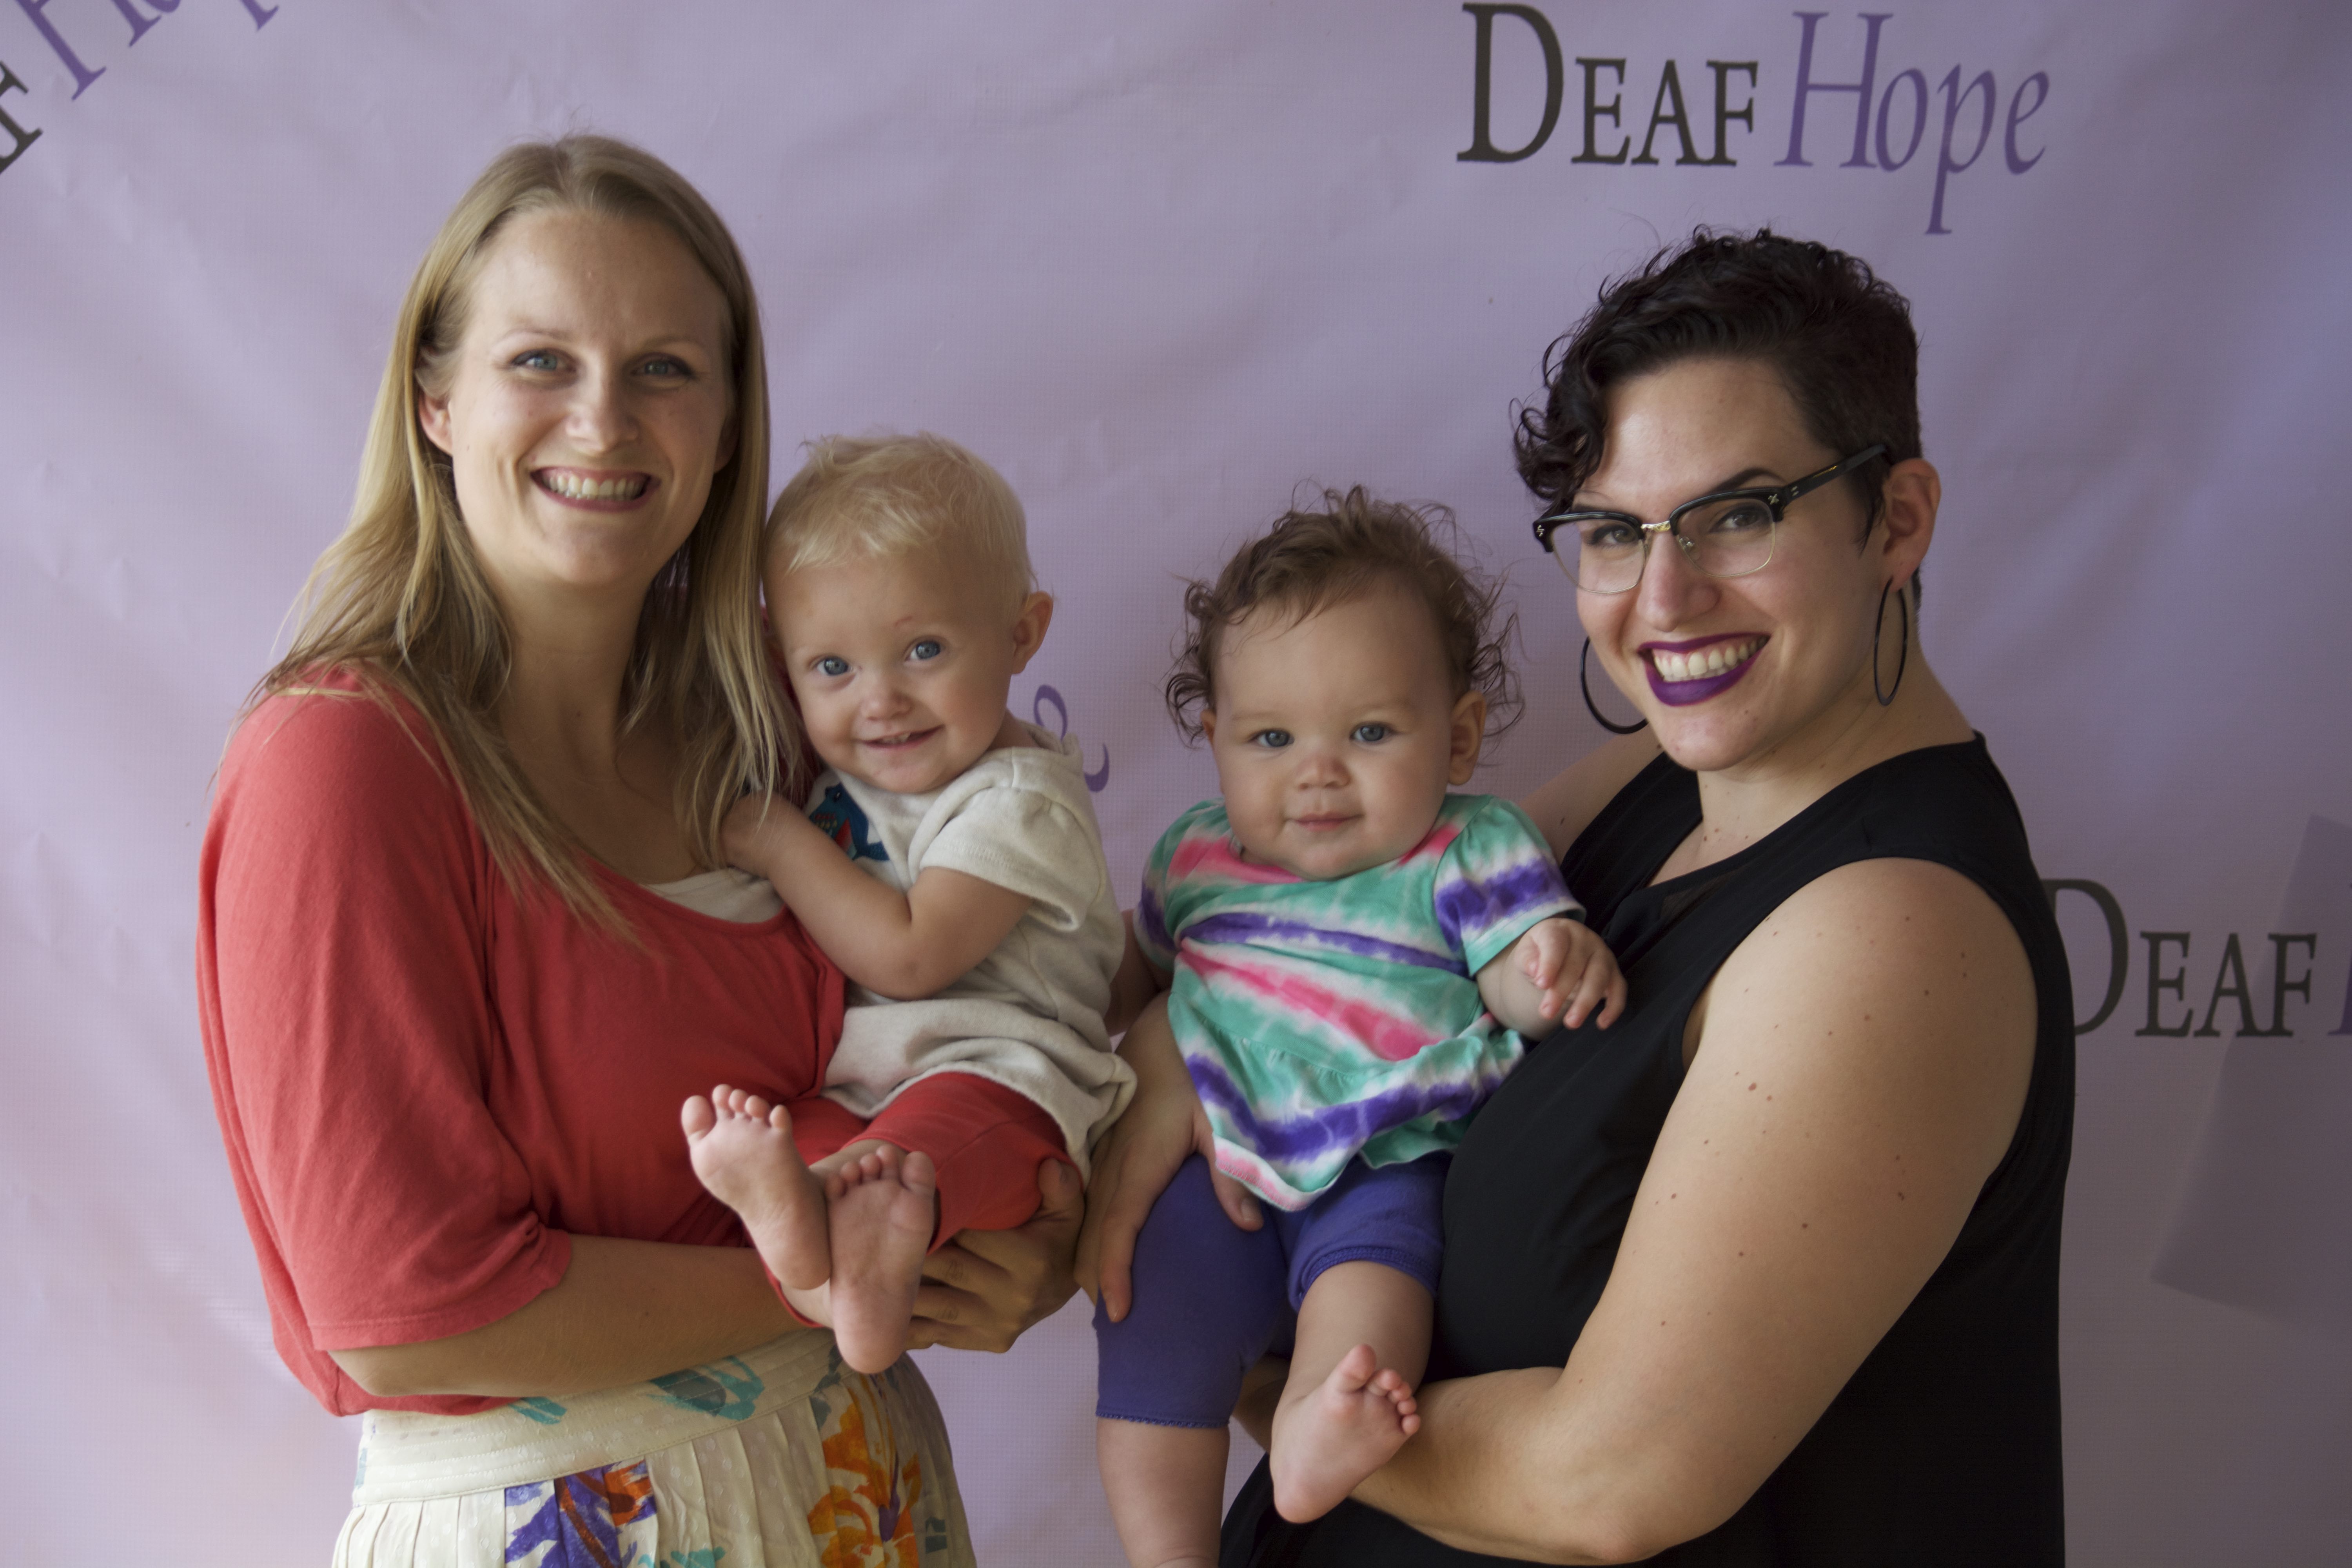 Our fantastic speaker Elena and Tara with their adorable children.  They brought such a sweet energy to the Tea Party!